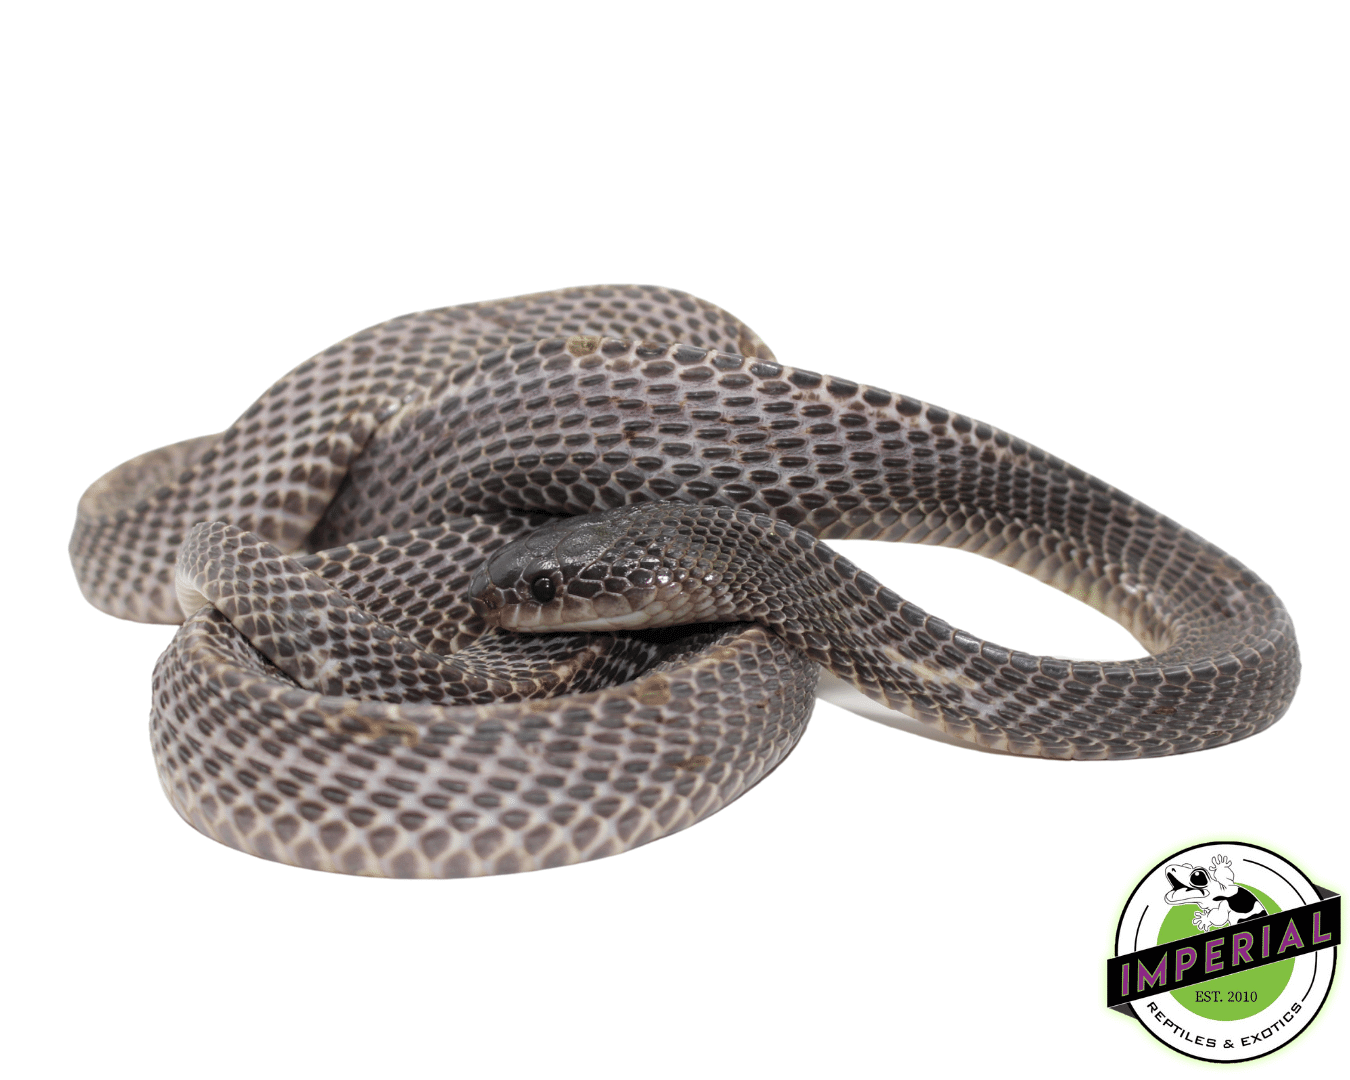 african file snake for sale, buy reptiles online